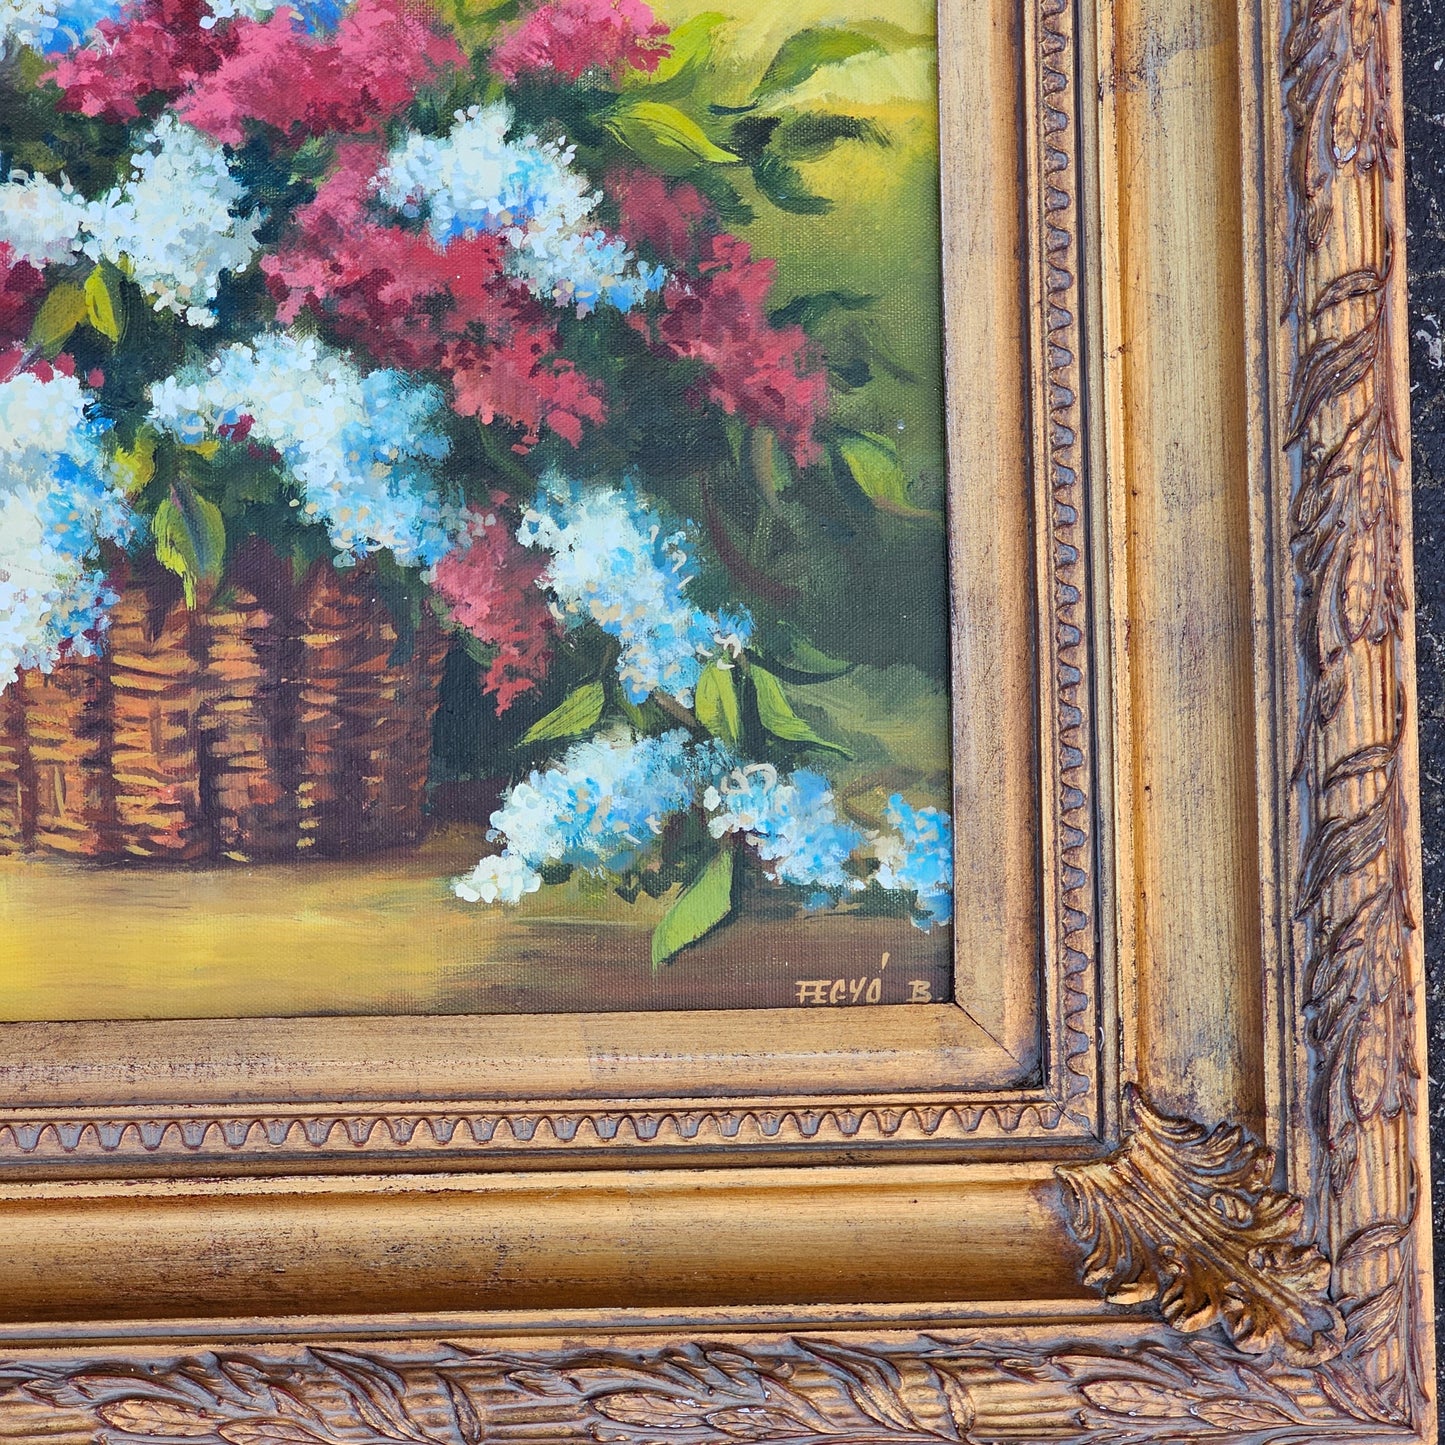 Contemporary Decorator Painting on Canvas of a Basket of Lillacs in a Beautiful Gilt Wood Frame